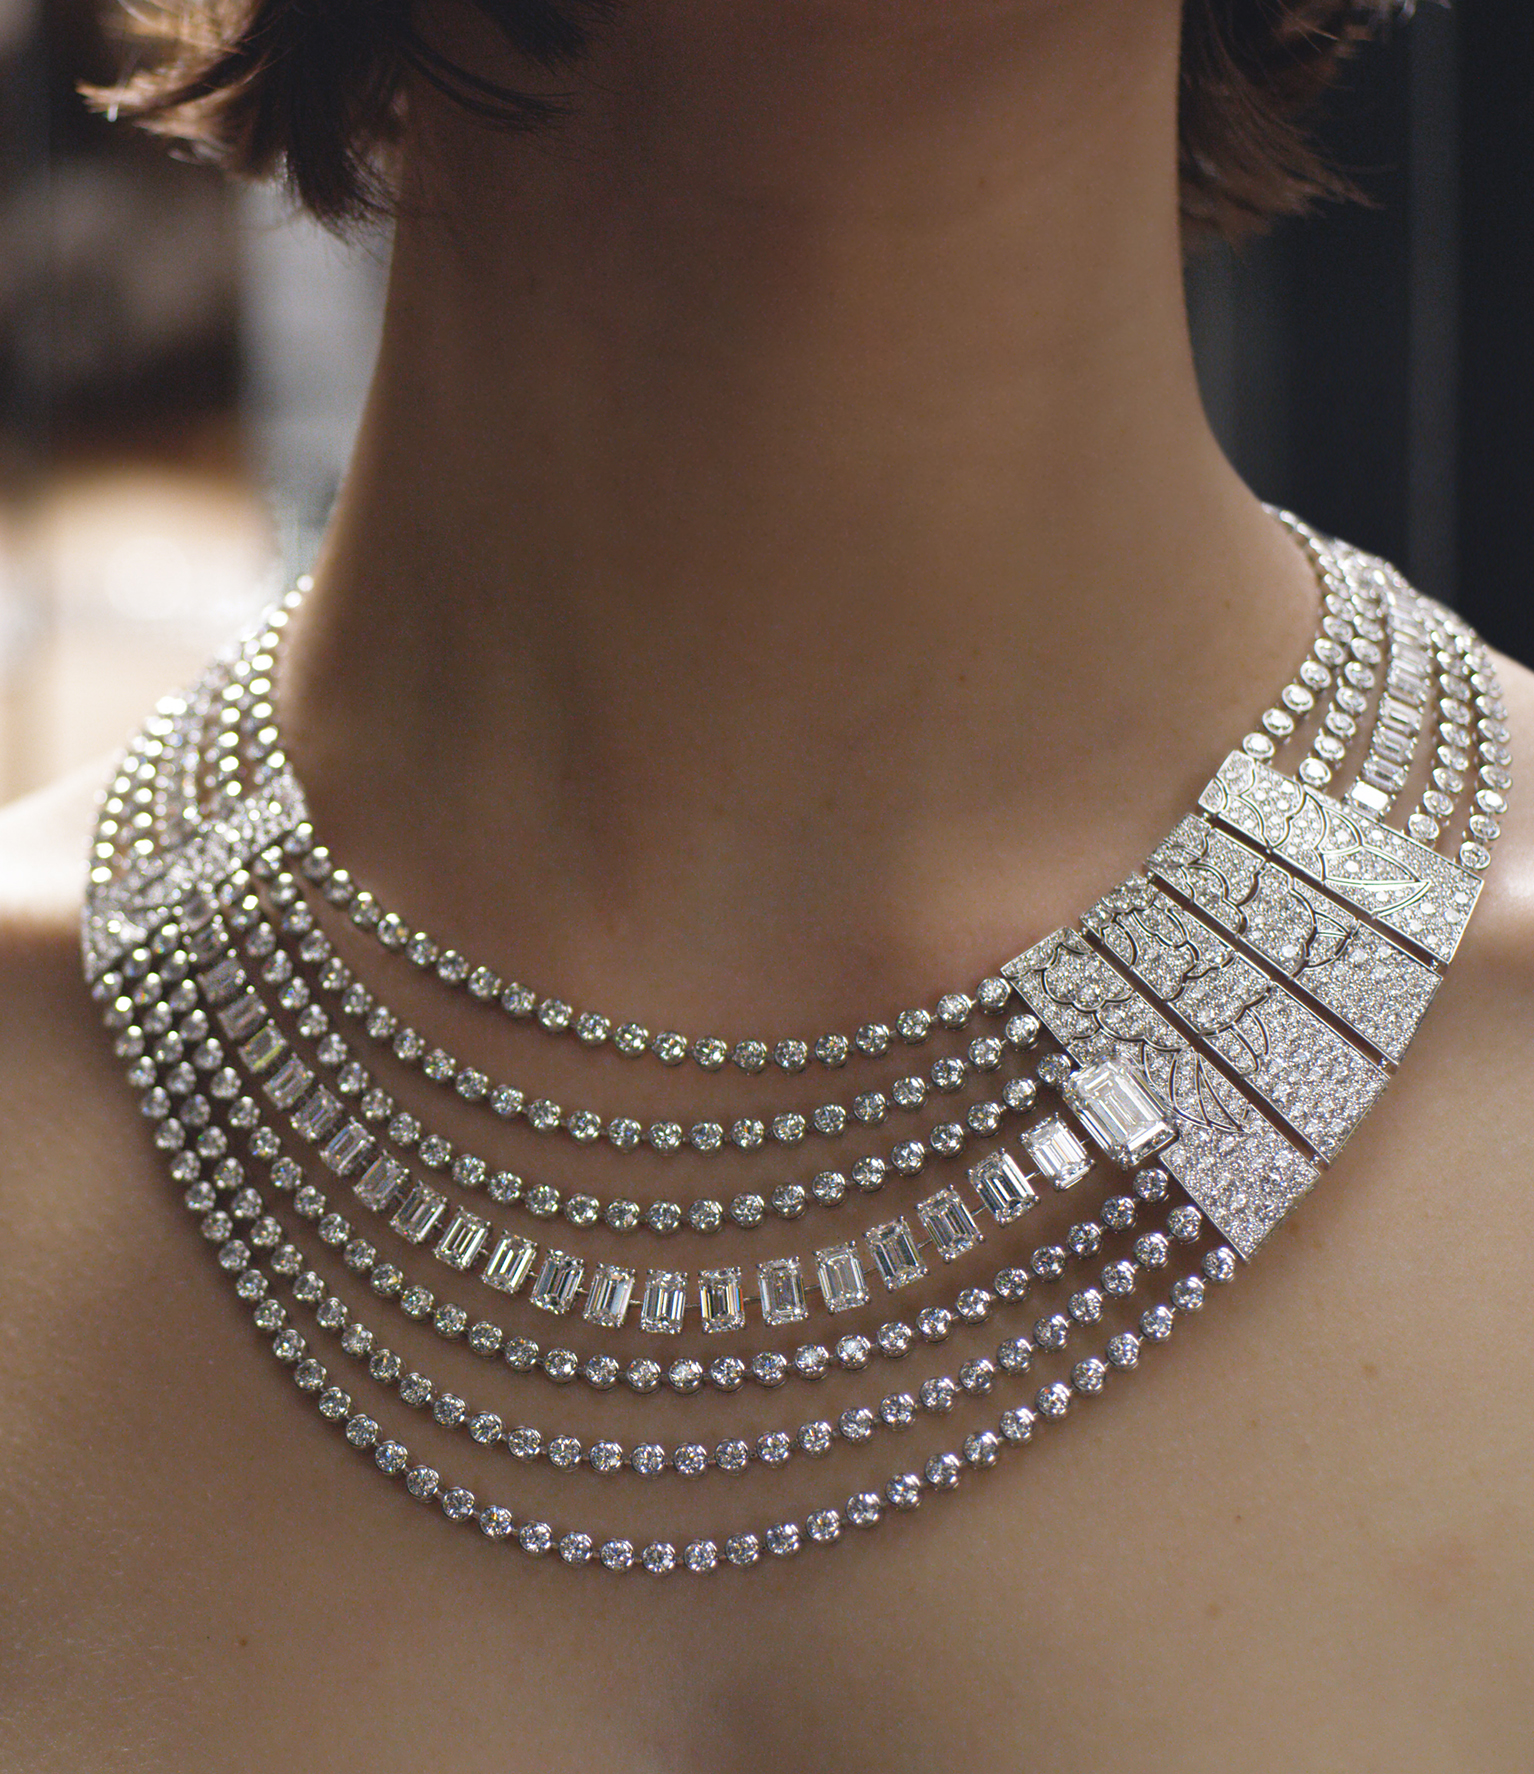 Chanel Jewelry for the Red Carpet. You’ve Been Invited to the Oscars. Now What?